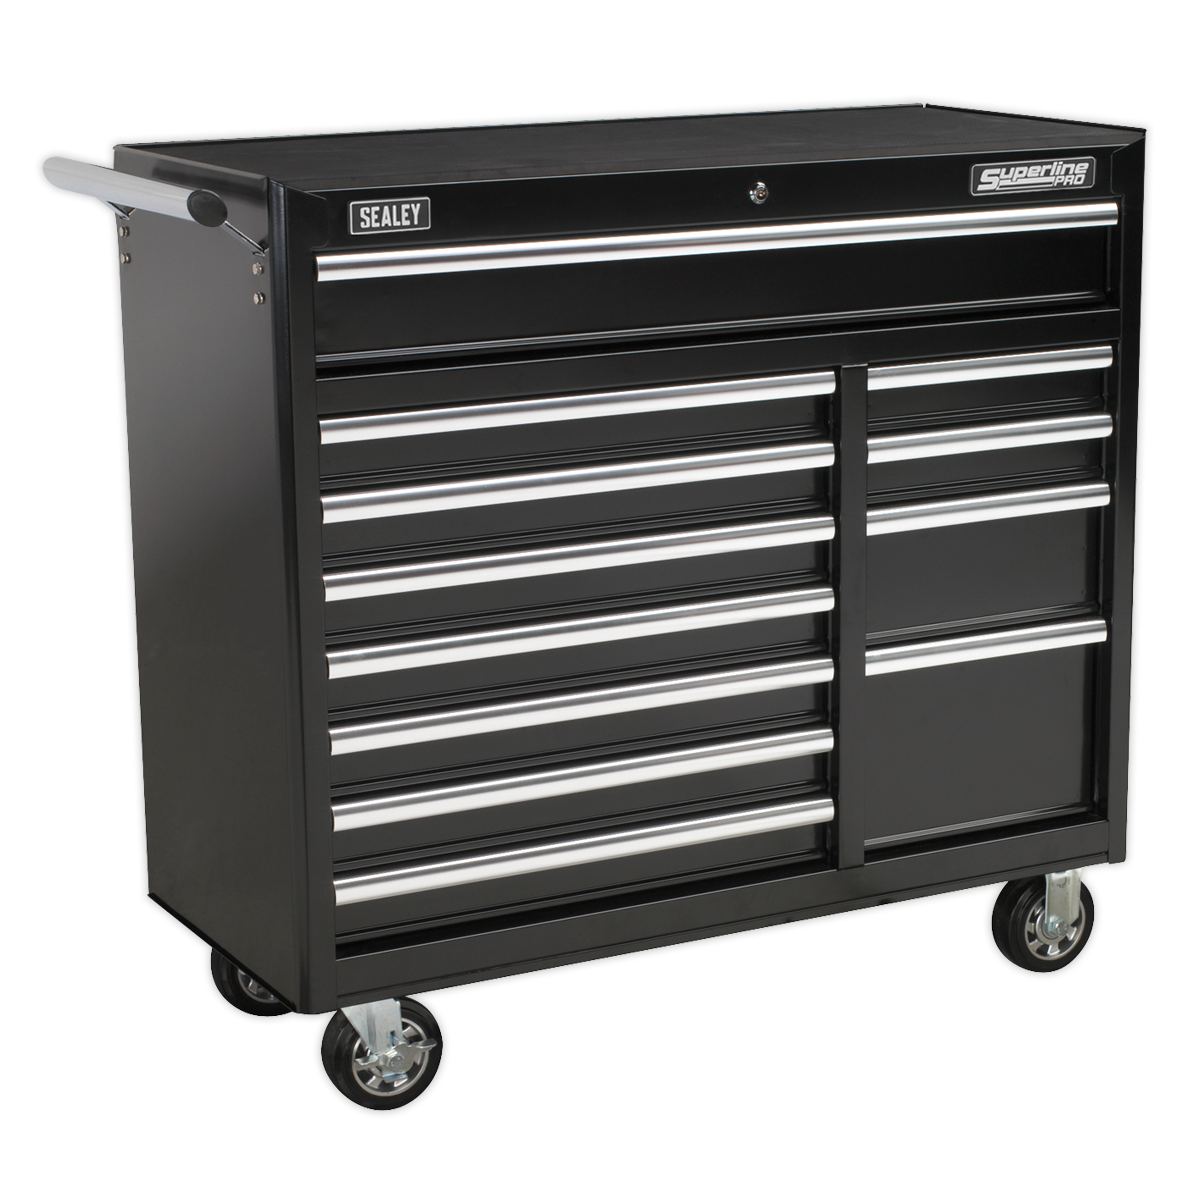 Sealey Rollcab 12 Drawer with Ball-Bearing Slides Heavy-Duty - Black